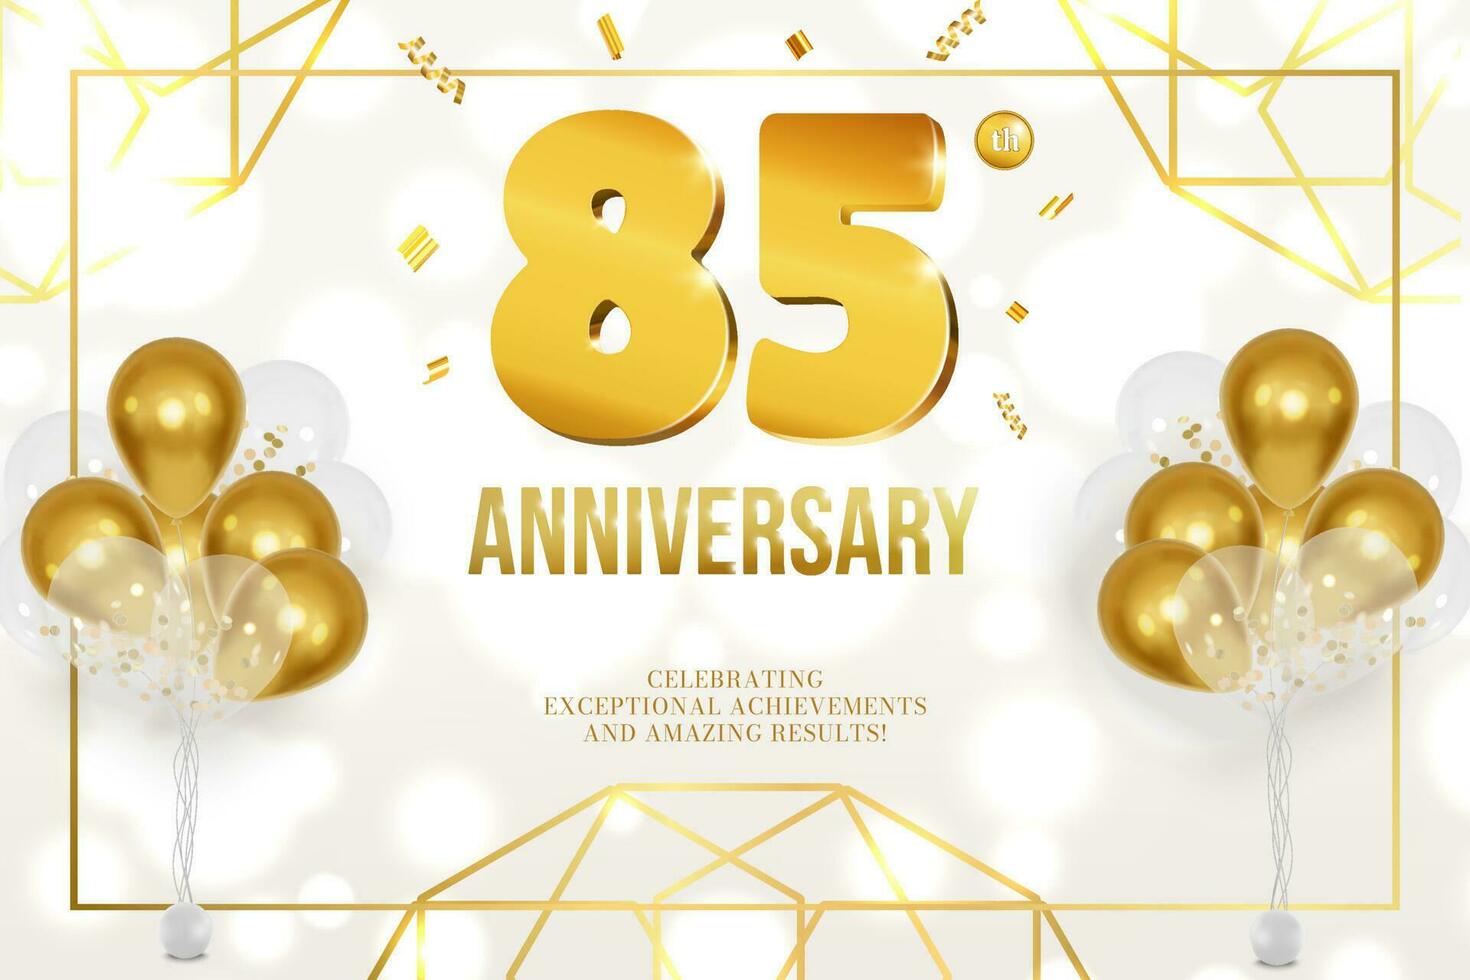 Anniversary celebration horizontal flyer golden letters and balloons 85 vector